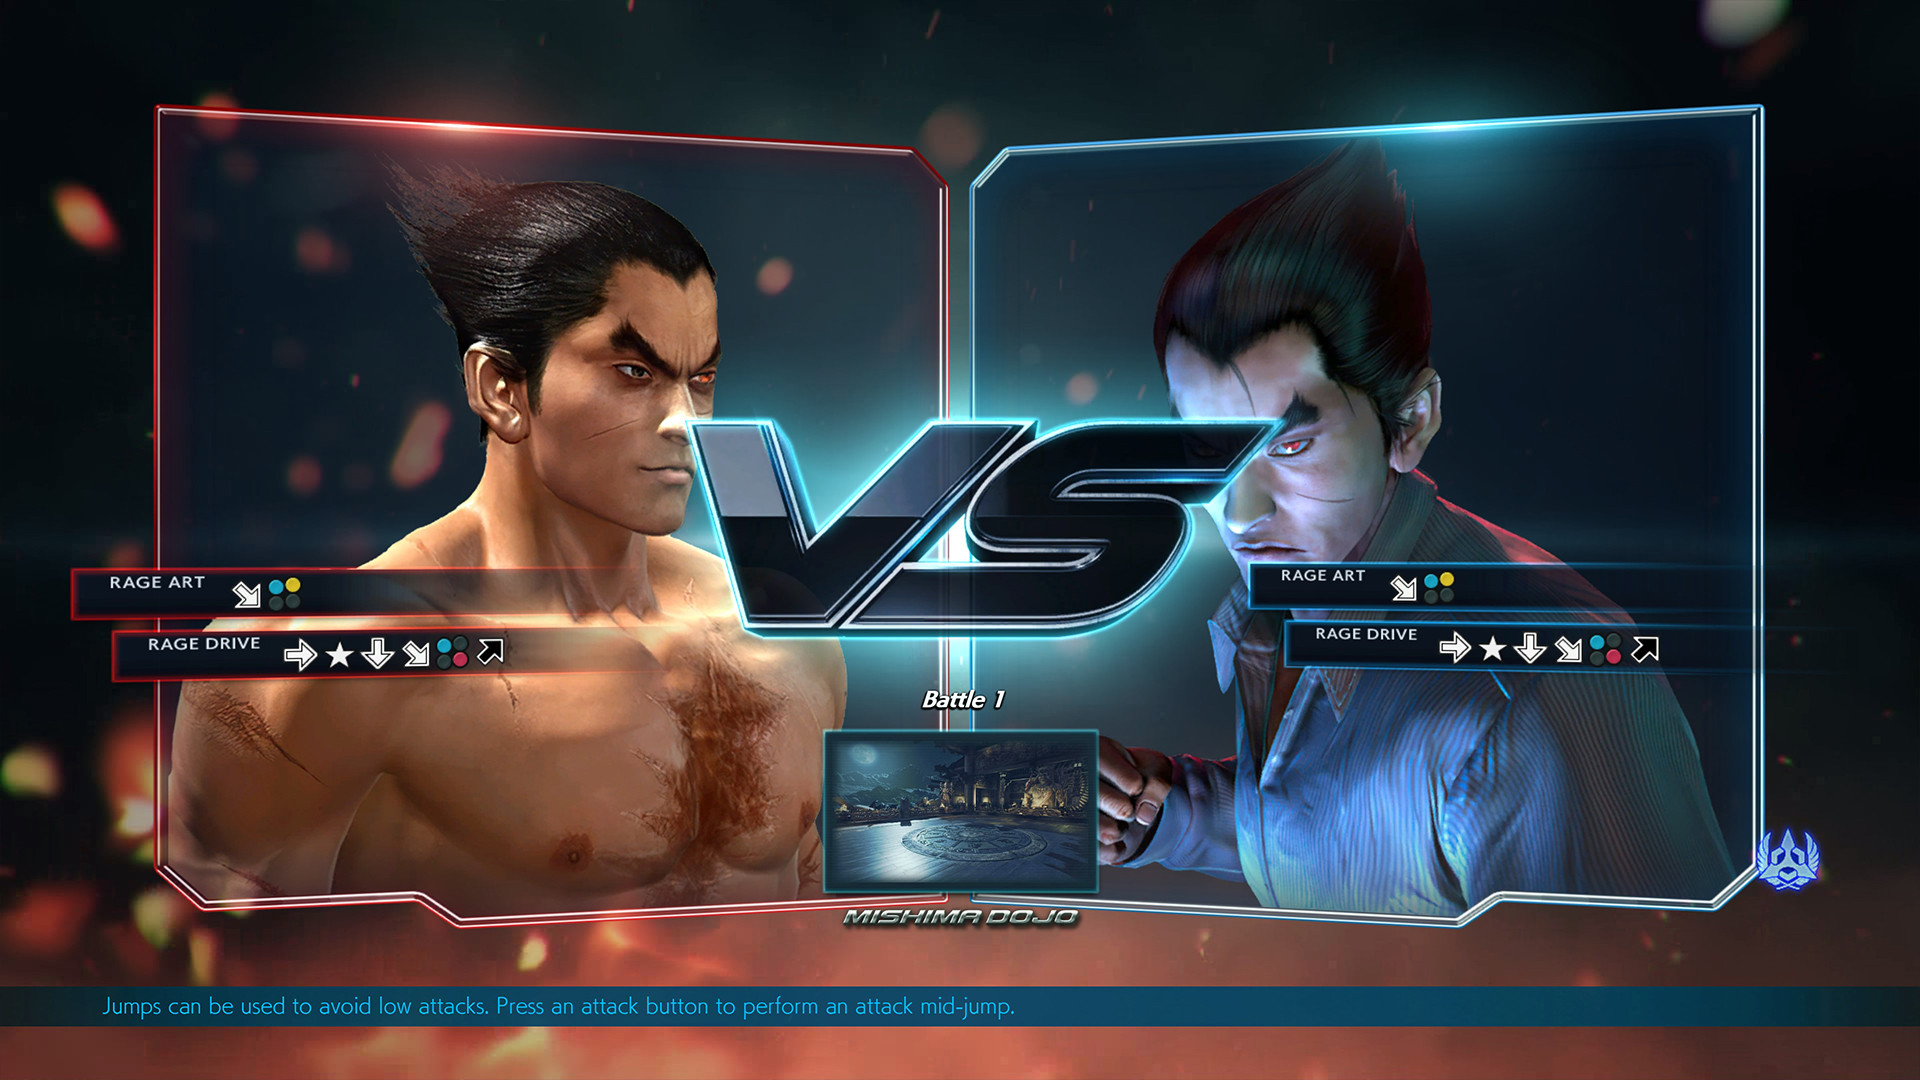 Yesterday I was playing Tekken 1-4 and learning about Kazuya and